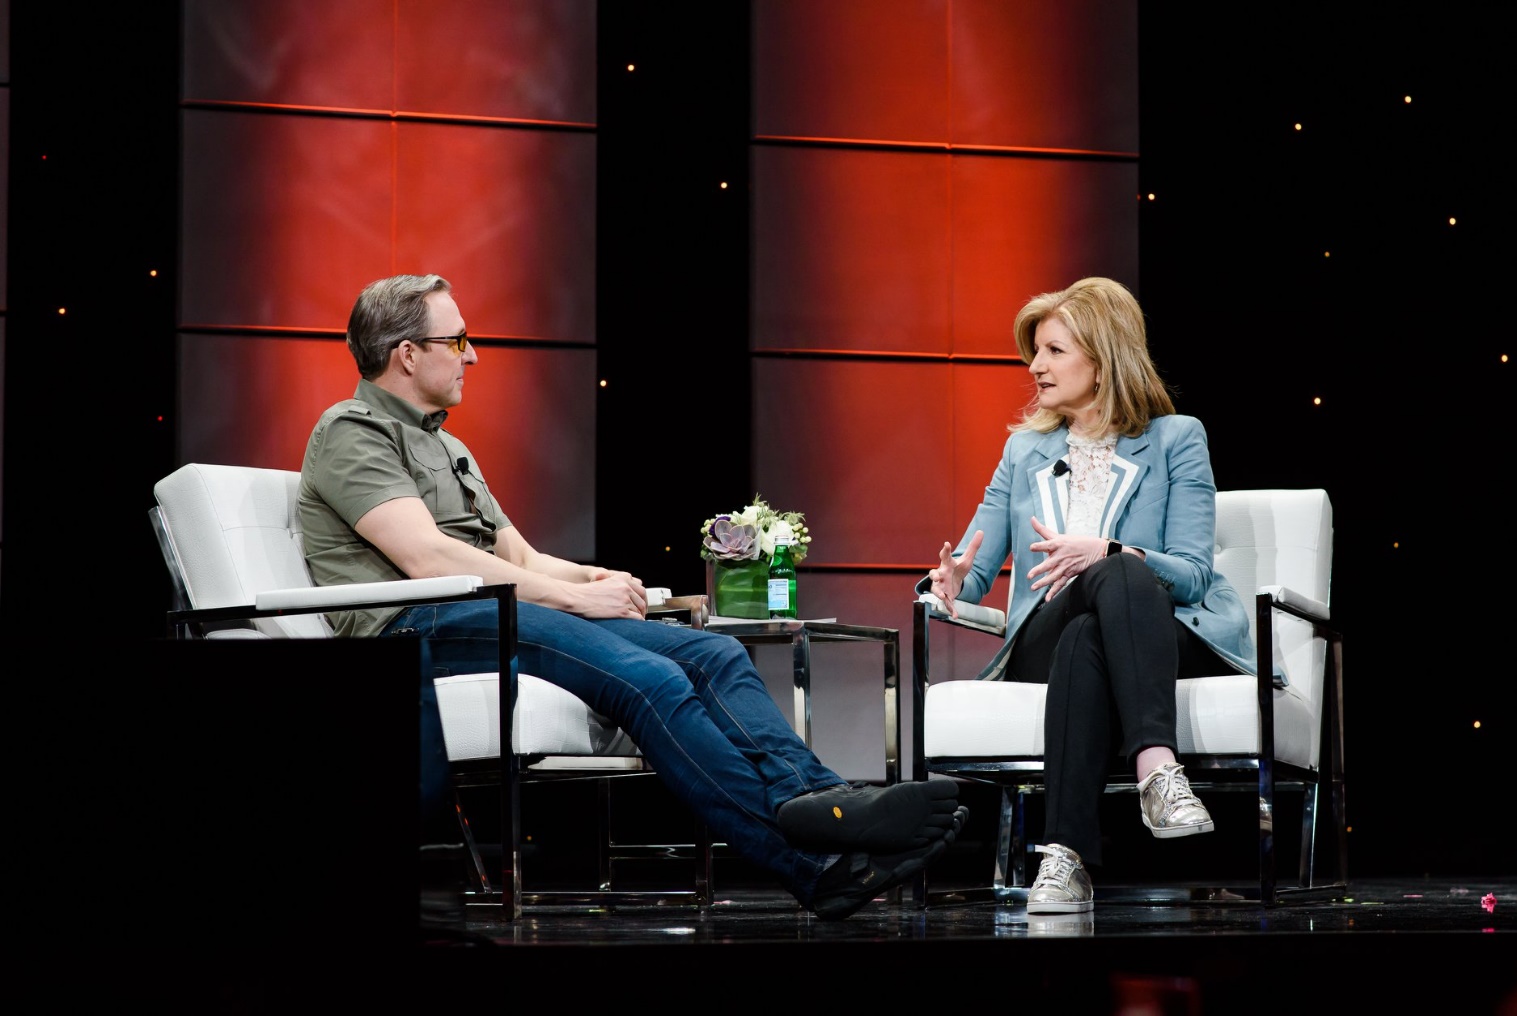 Arianna Huffington in an interview with guest on stage